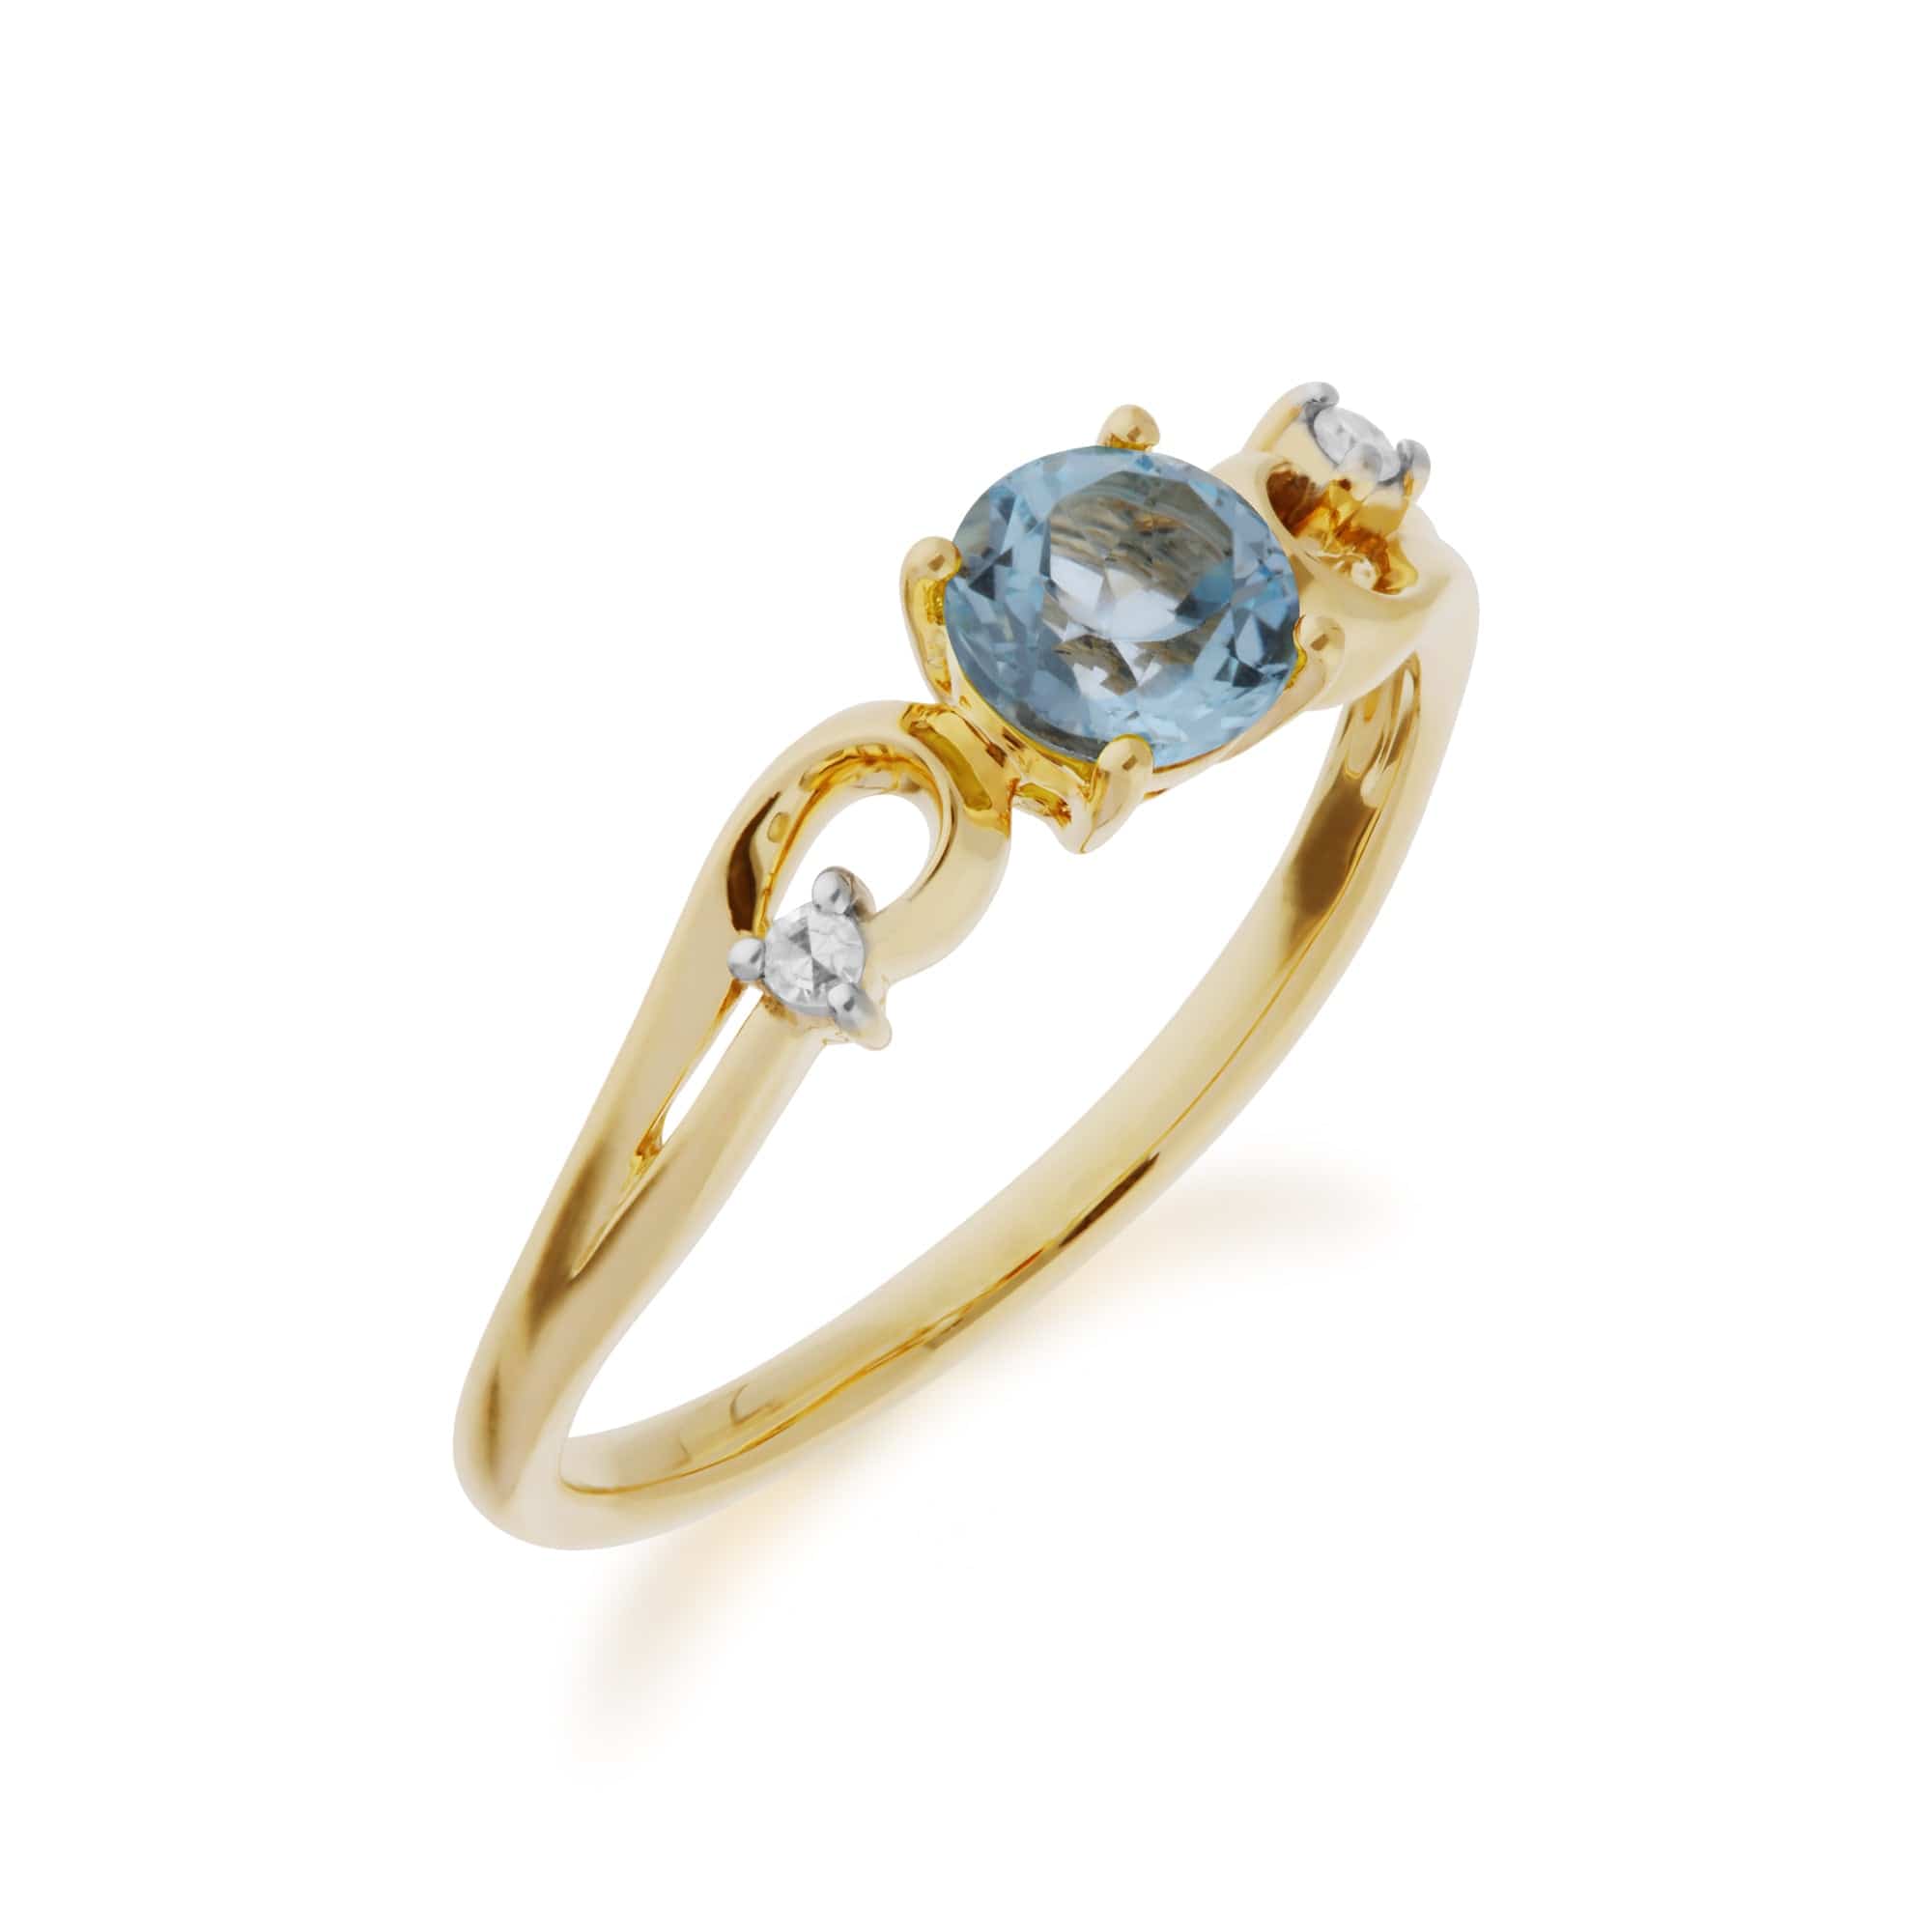 135R1742039 Classic Round Blue Topaz & Diamond Ring in 9ct Yellow Gold 2